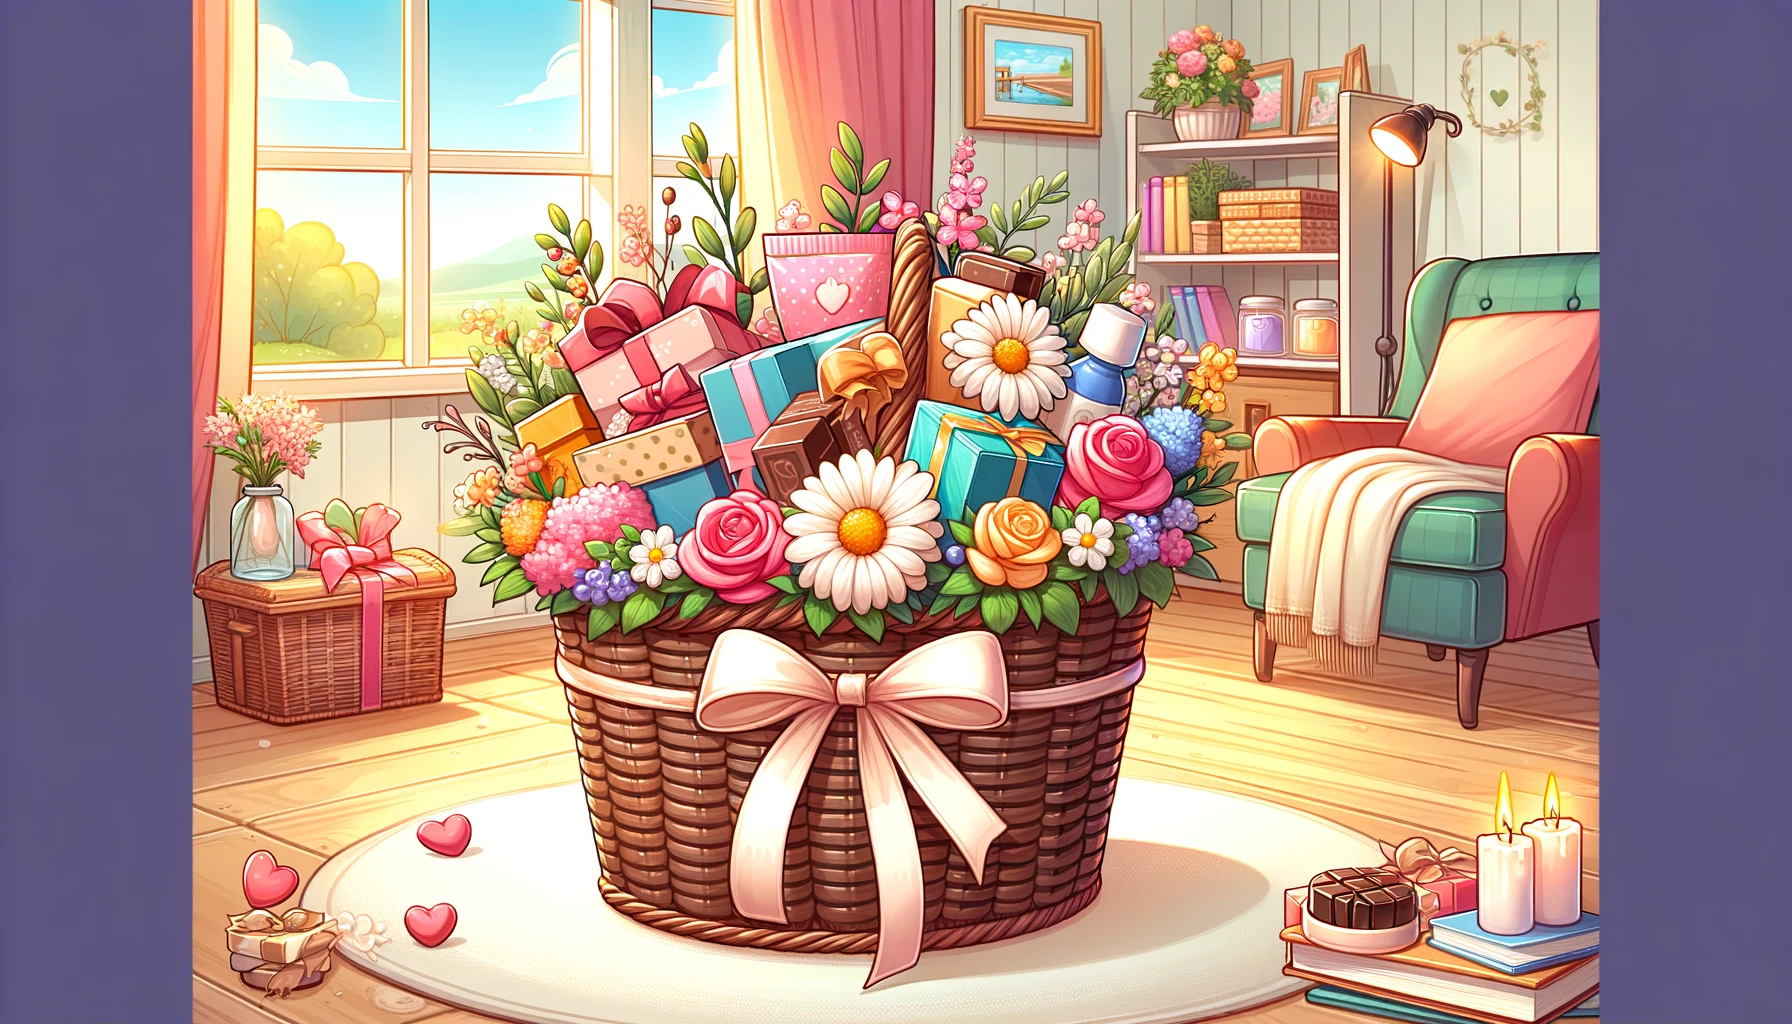  an image featuring a beautifully decorated hamper filled with gifts like flowers, chocolates, spa products, and small tokens of appreciation 